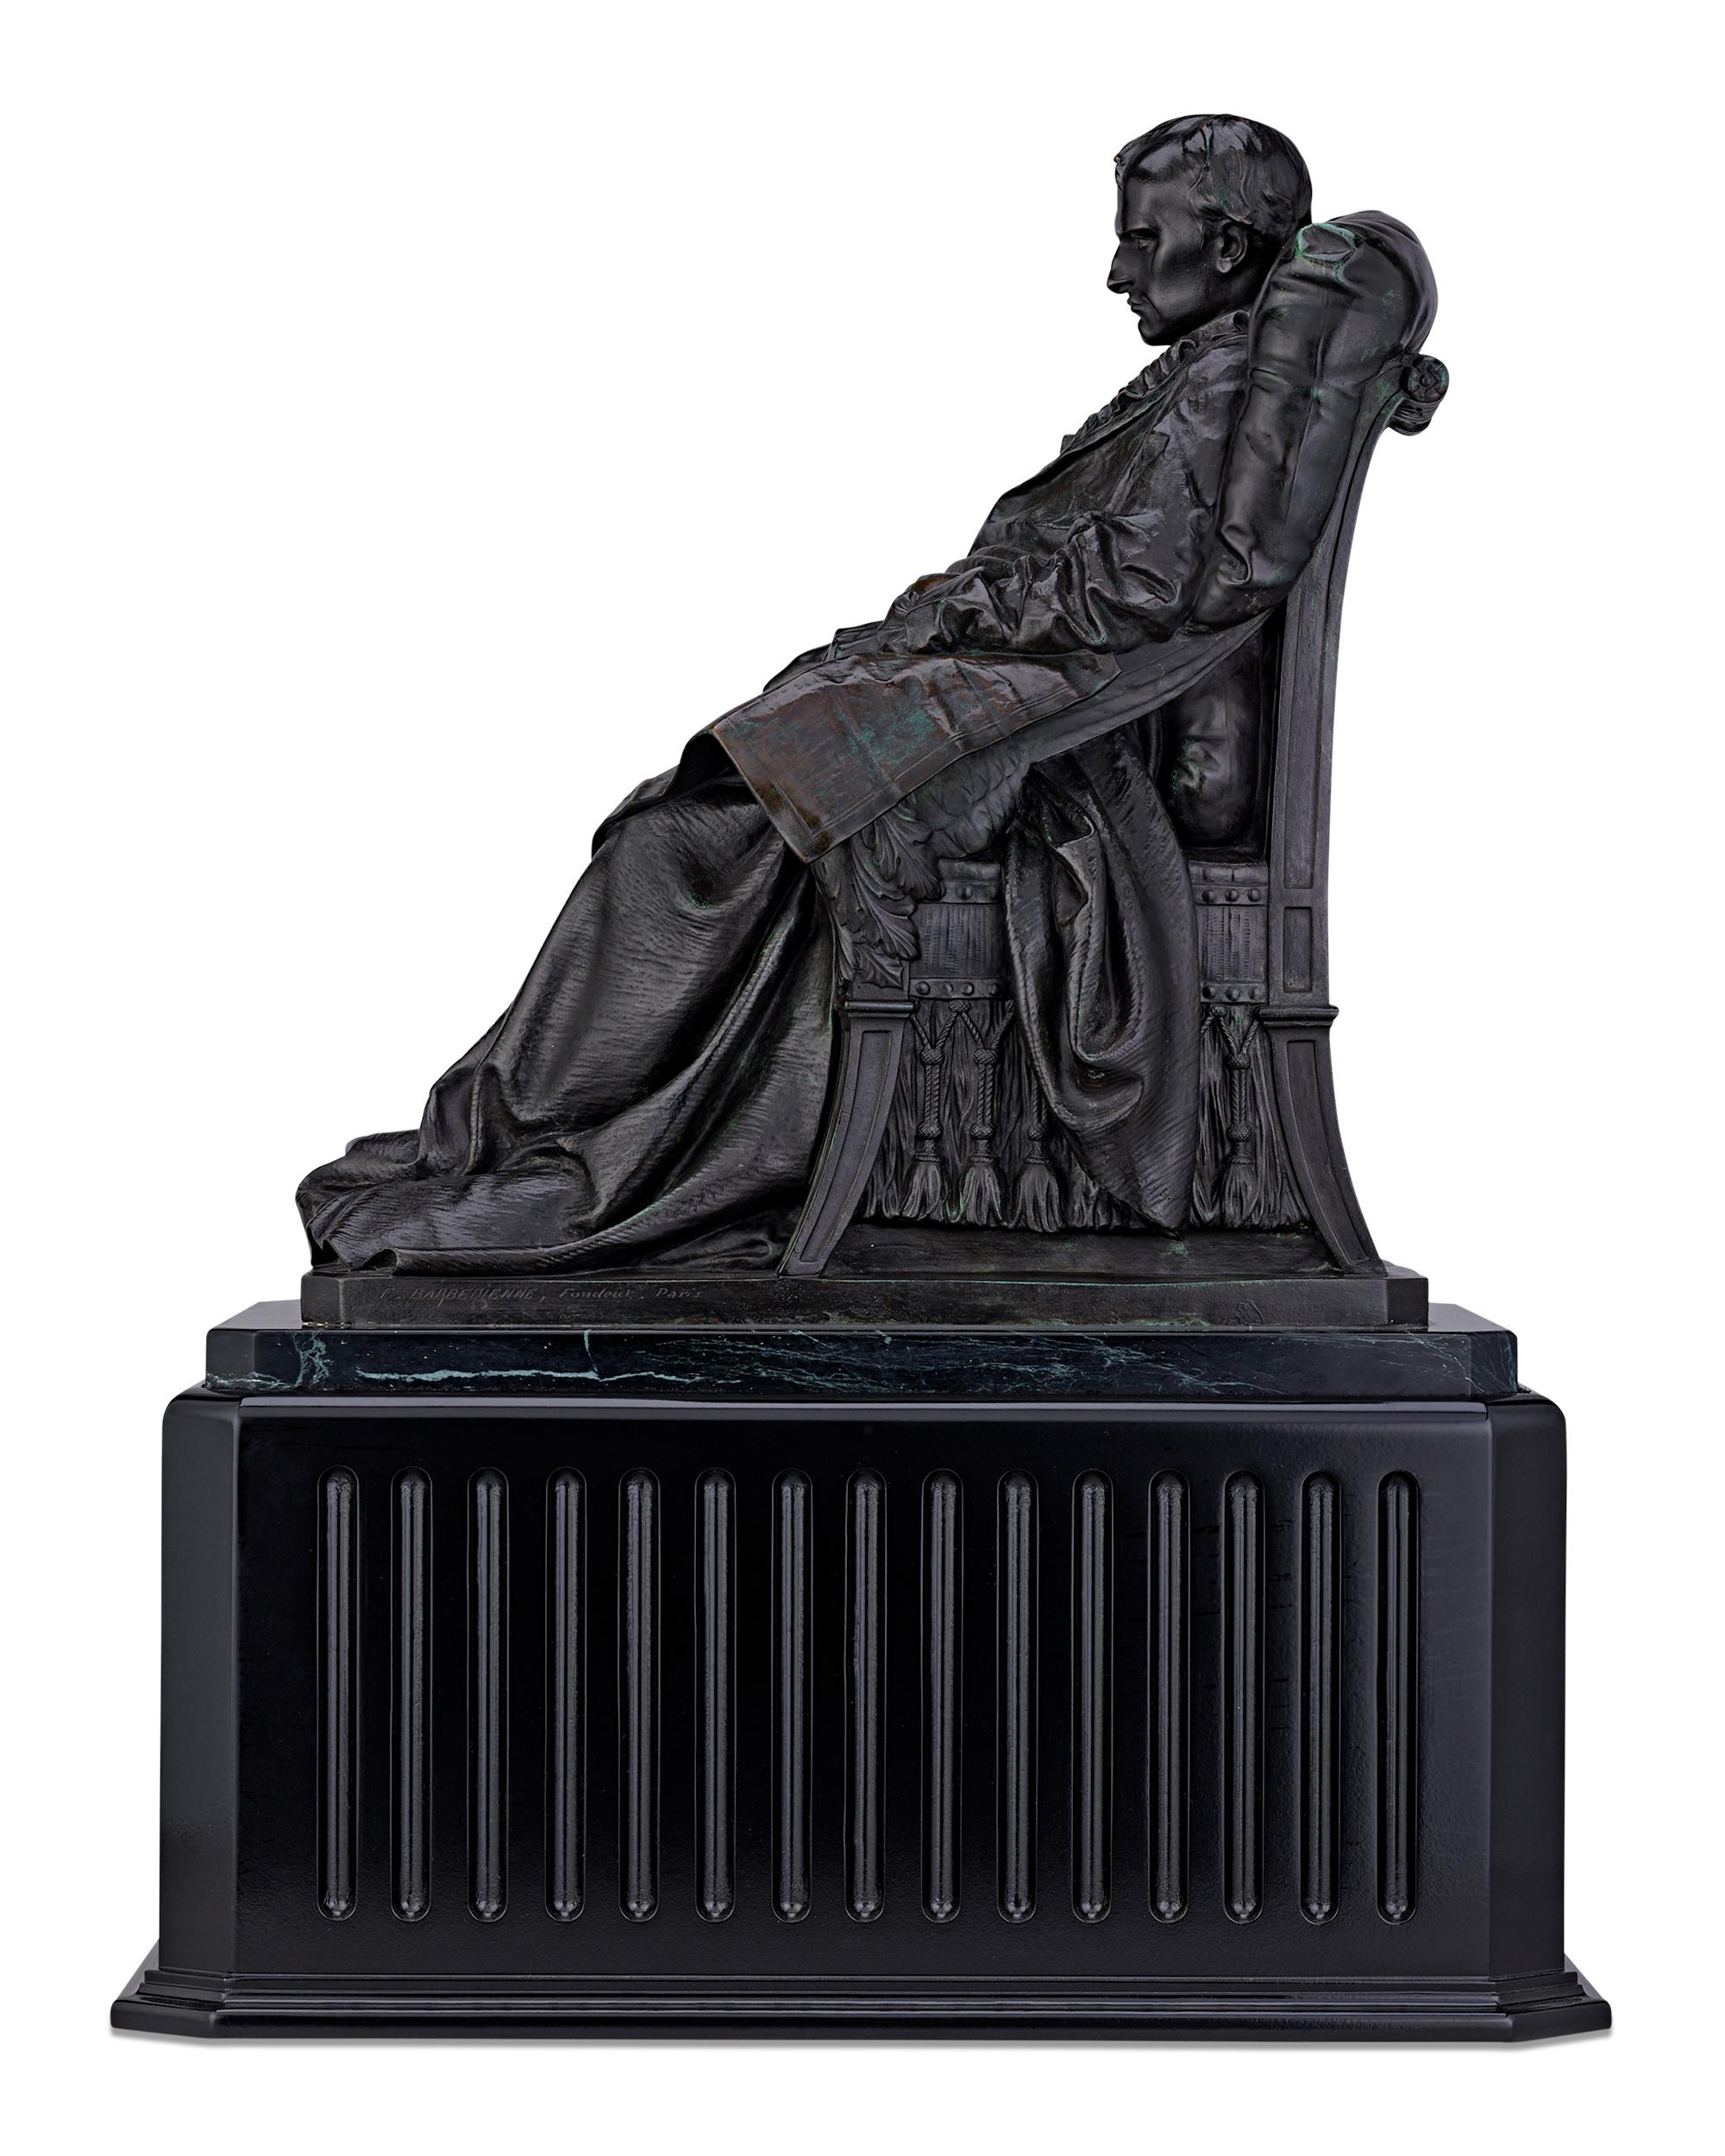 This highly evocative bronze by Vincenzo Vela captures the deposed Emperor Napoléon on his deathbed, holding a map of Europe and lost in thought about what might have been. Remarkable among most portrayals of the exiled leader, this highly detailed